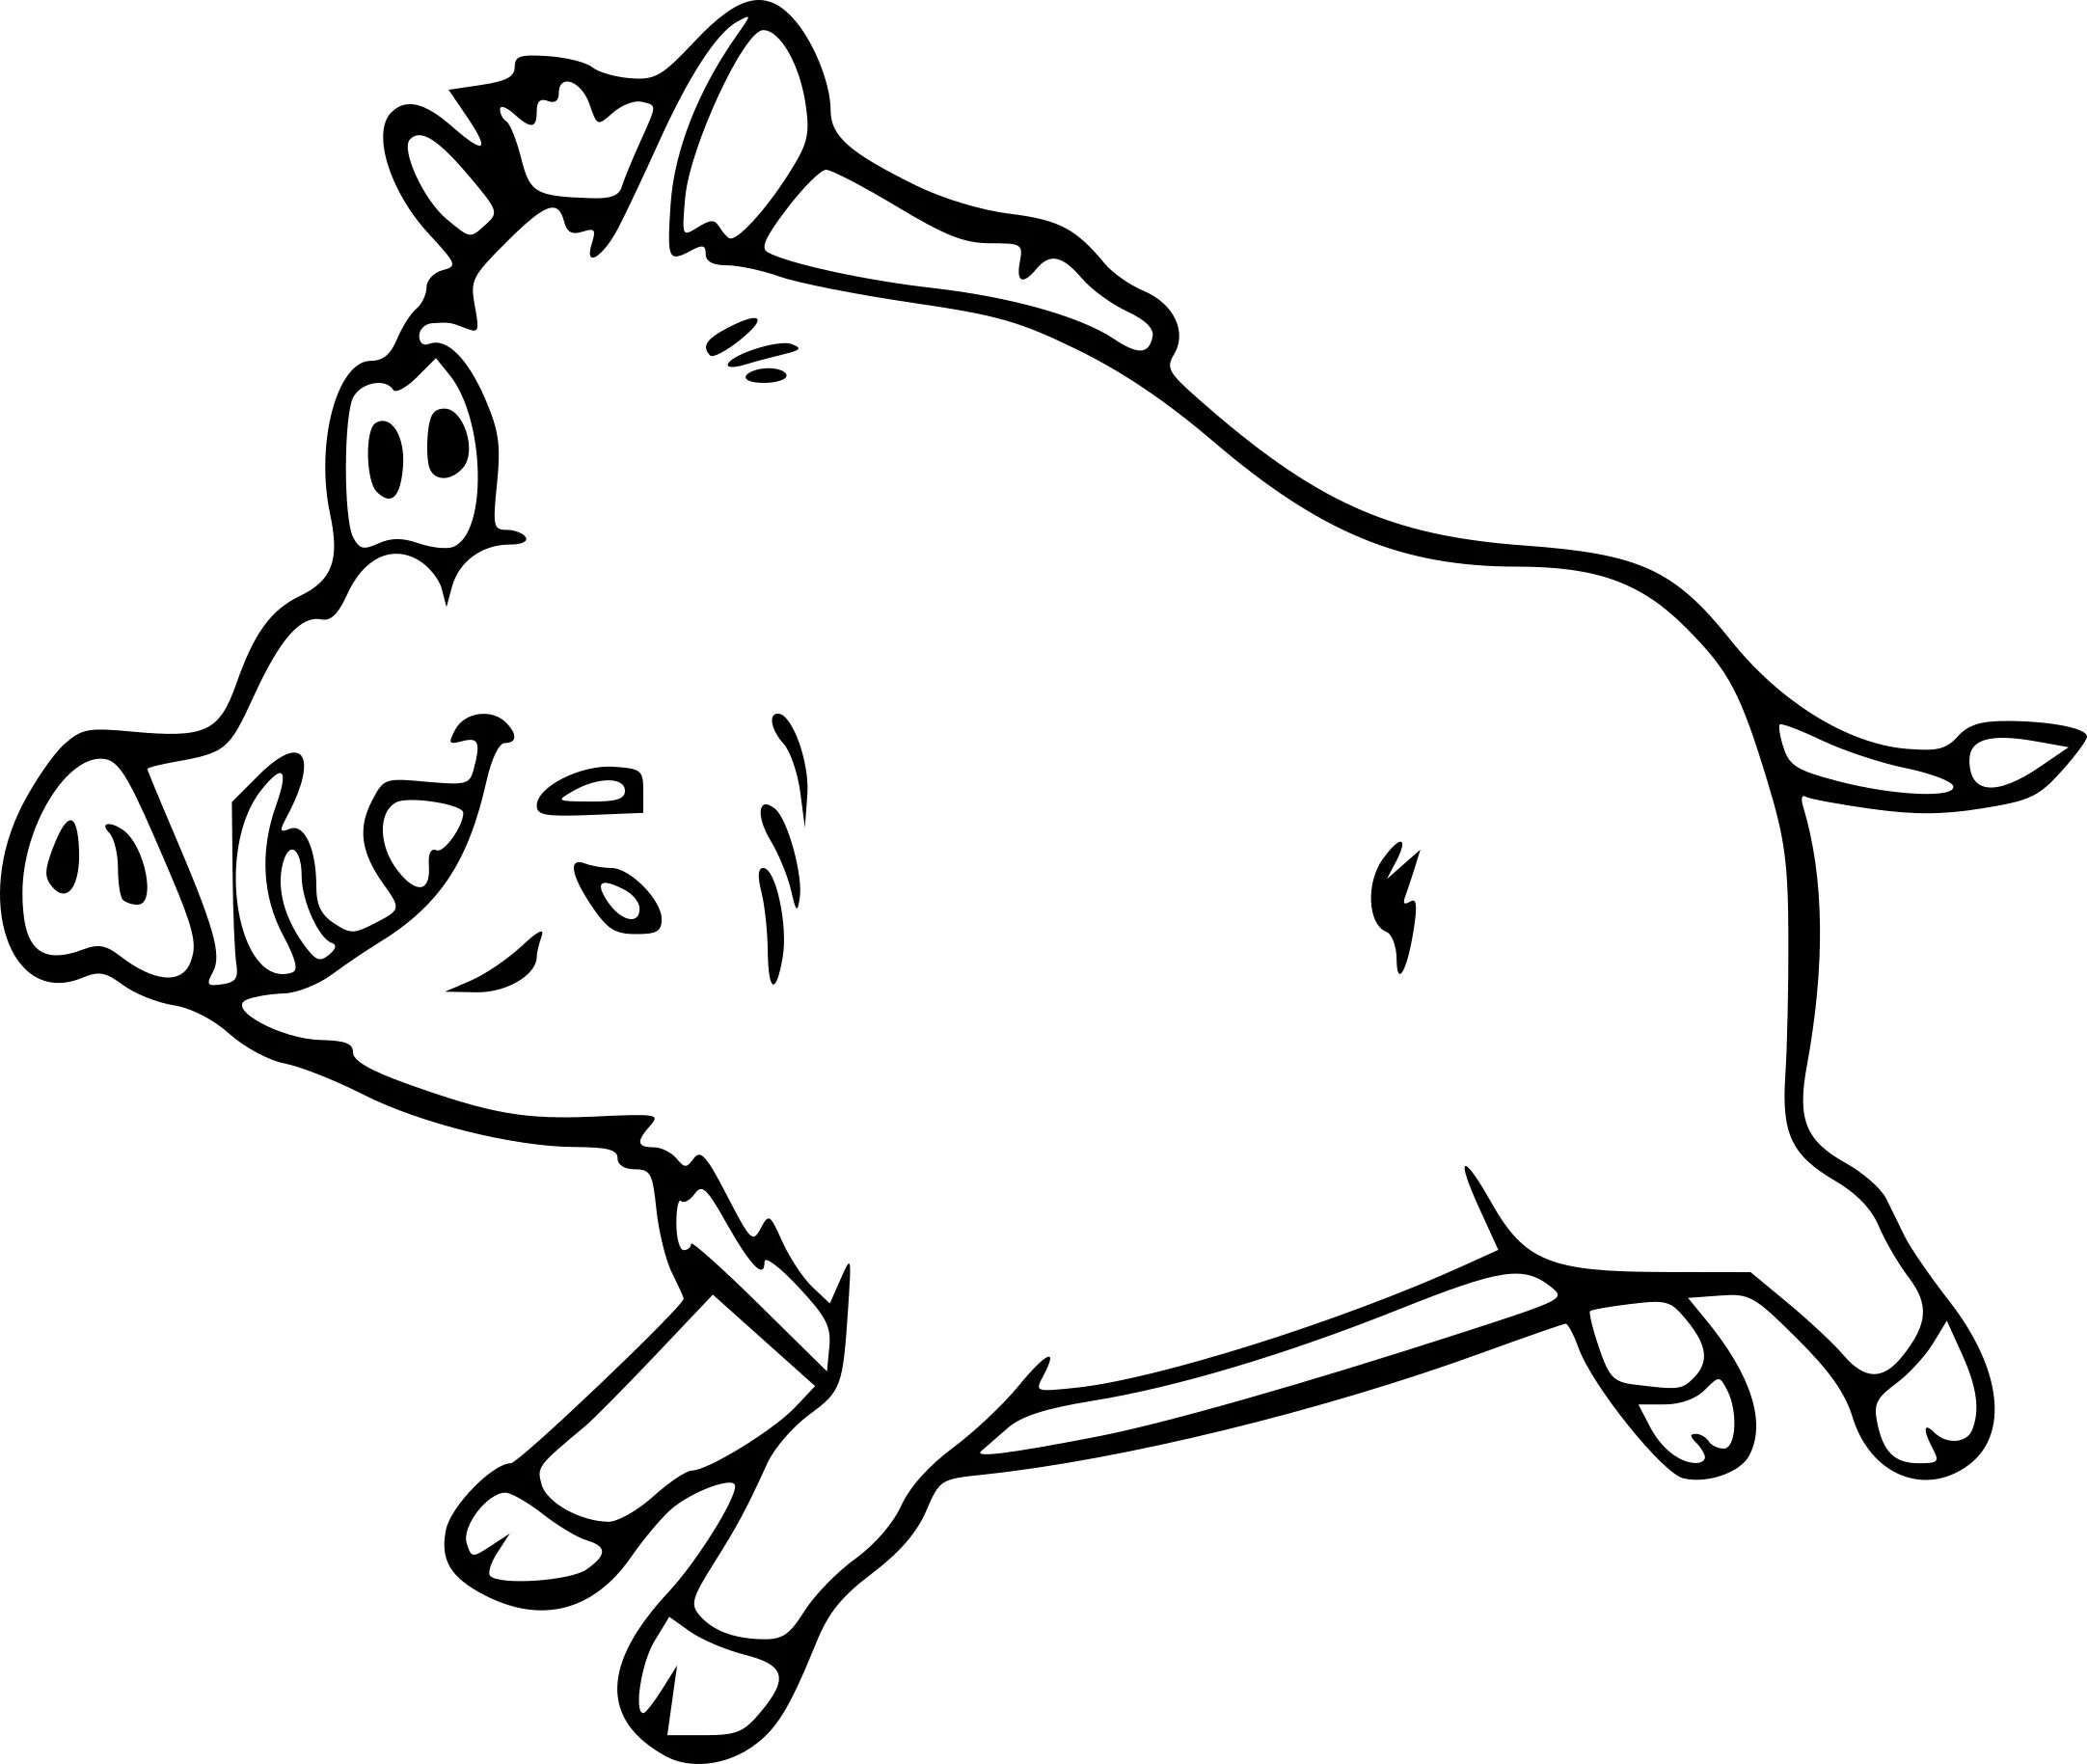 Coloring page brave boar